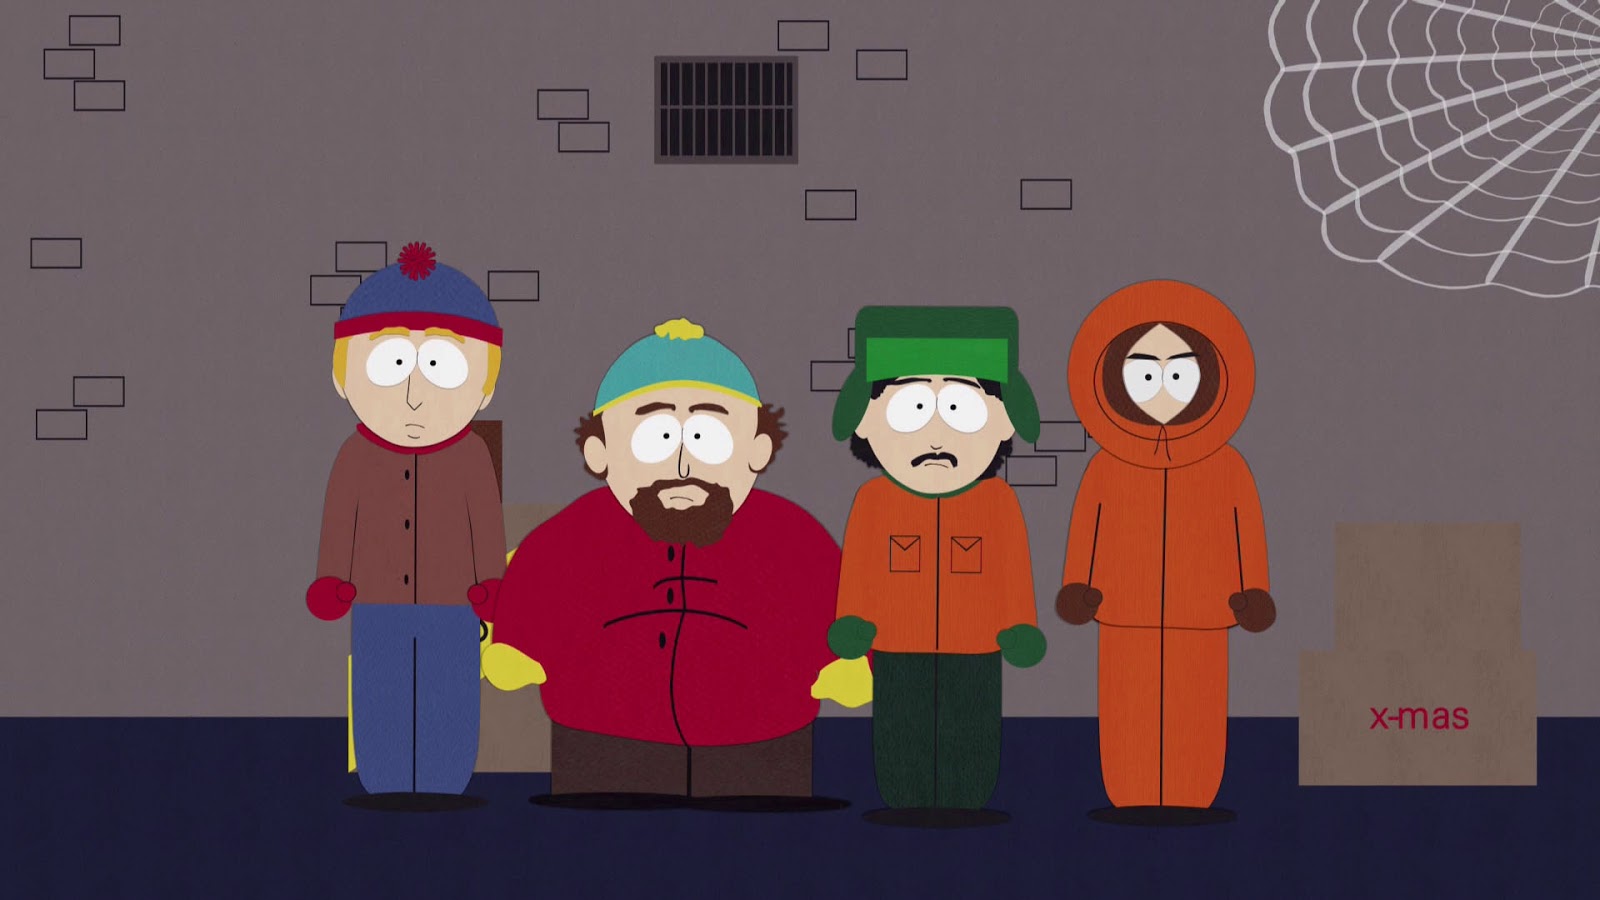 South Park - "Spontaneous Combustion" HD Screen Captures.